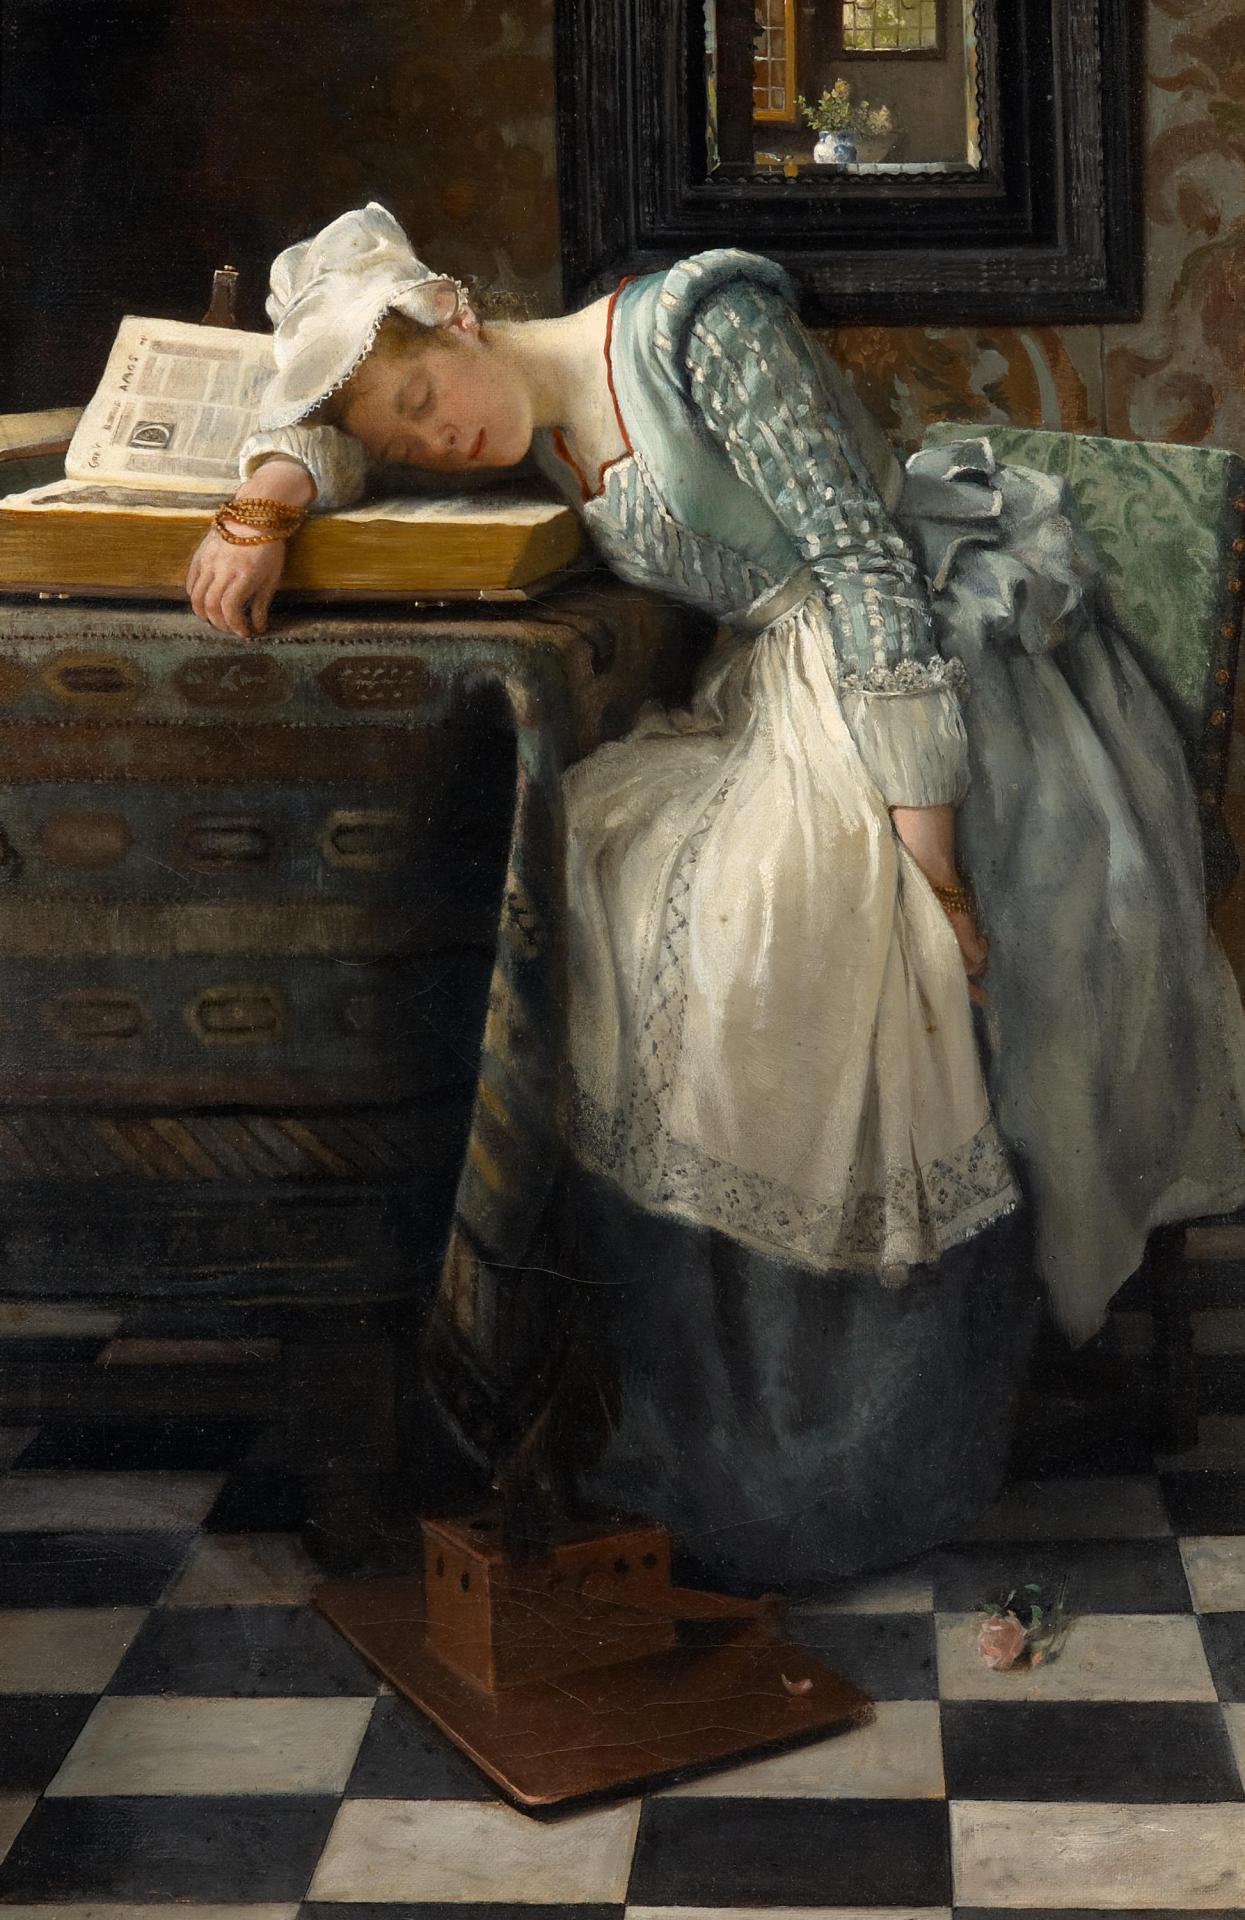 World of Dreams (1876). Lady Laura Theresa Alma-Tadema (English, 1852-1909). Oil on canvas.
Lady Laura Theresa Alma-Tadema was one of the leading painters of the English salon painting of her day. She was a student and the second wife of Sir Lawrence...